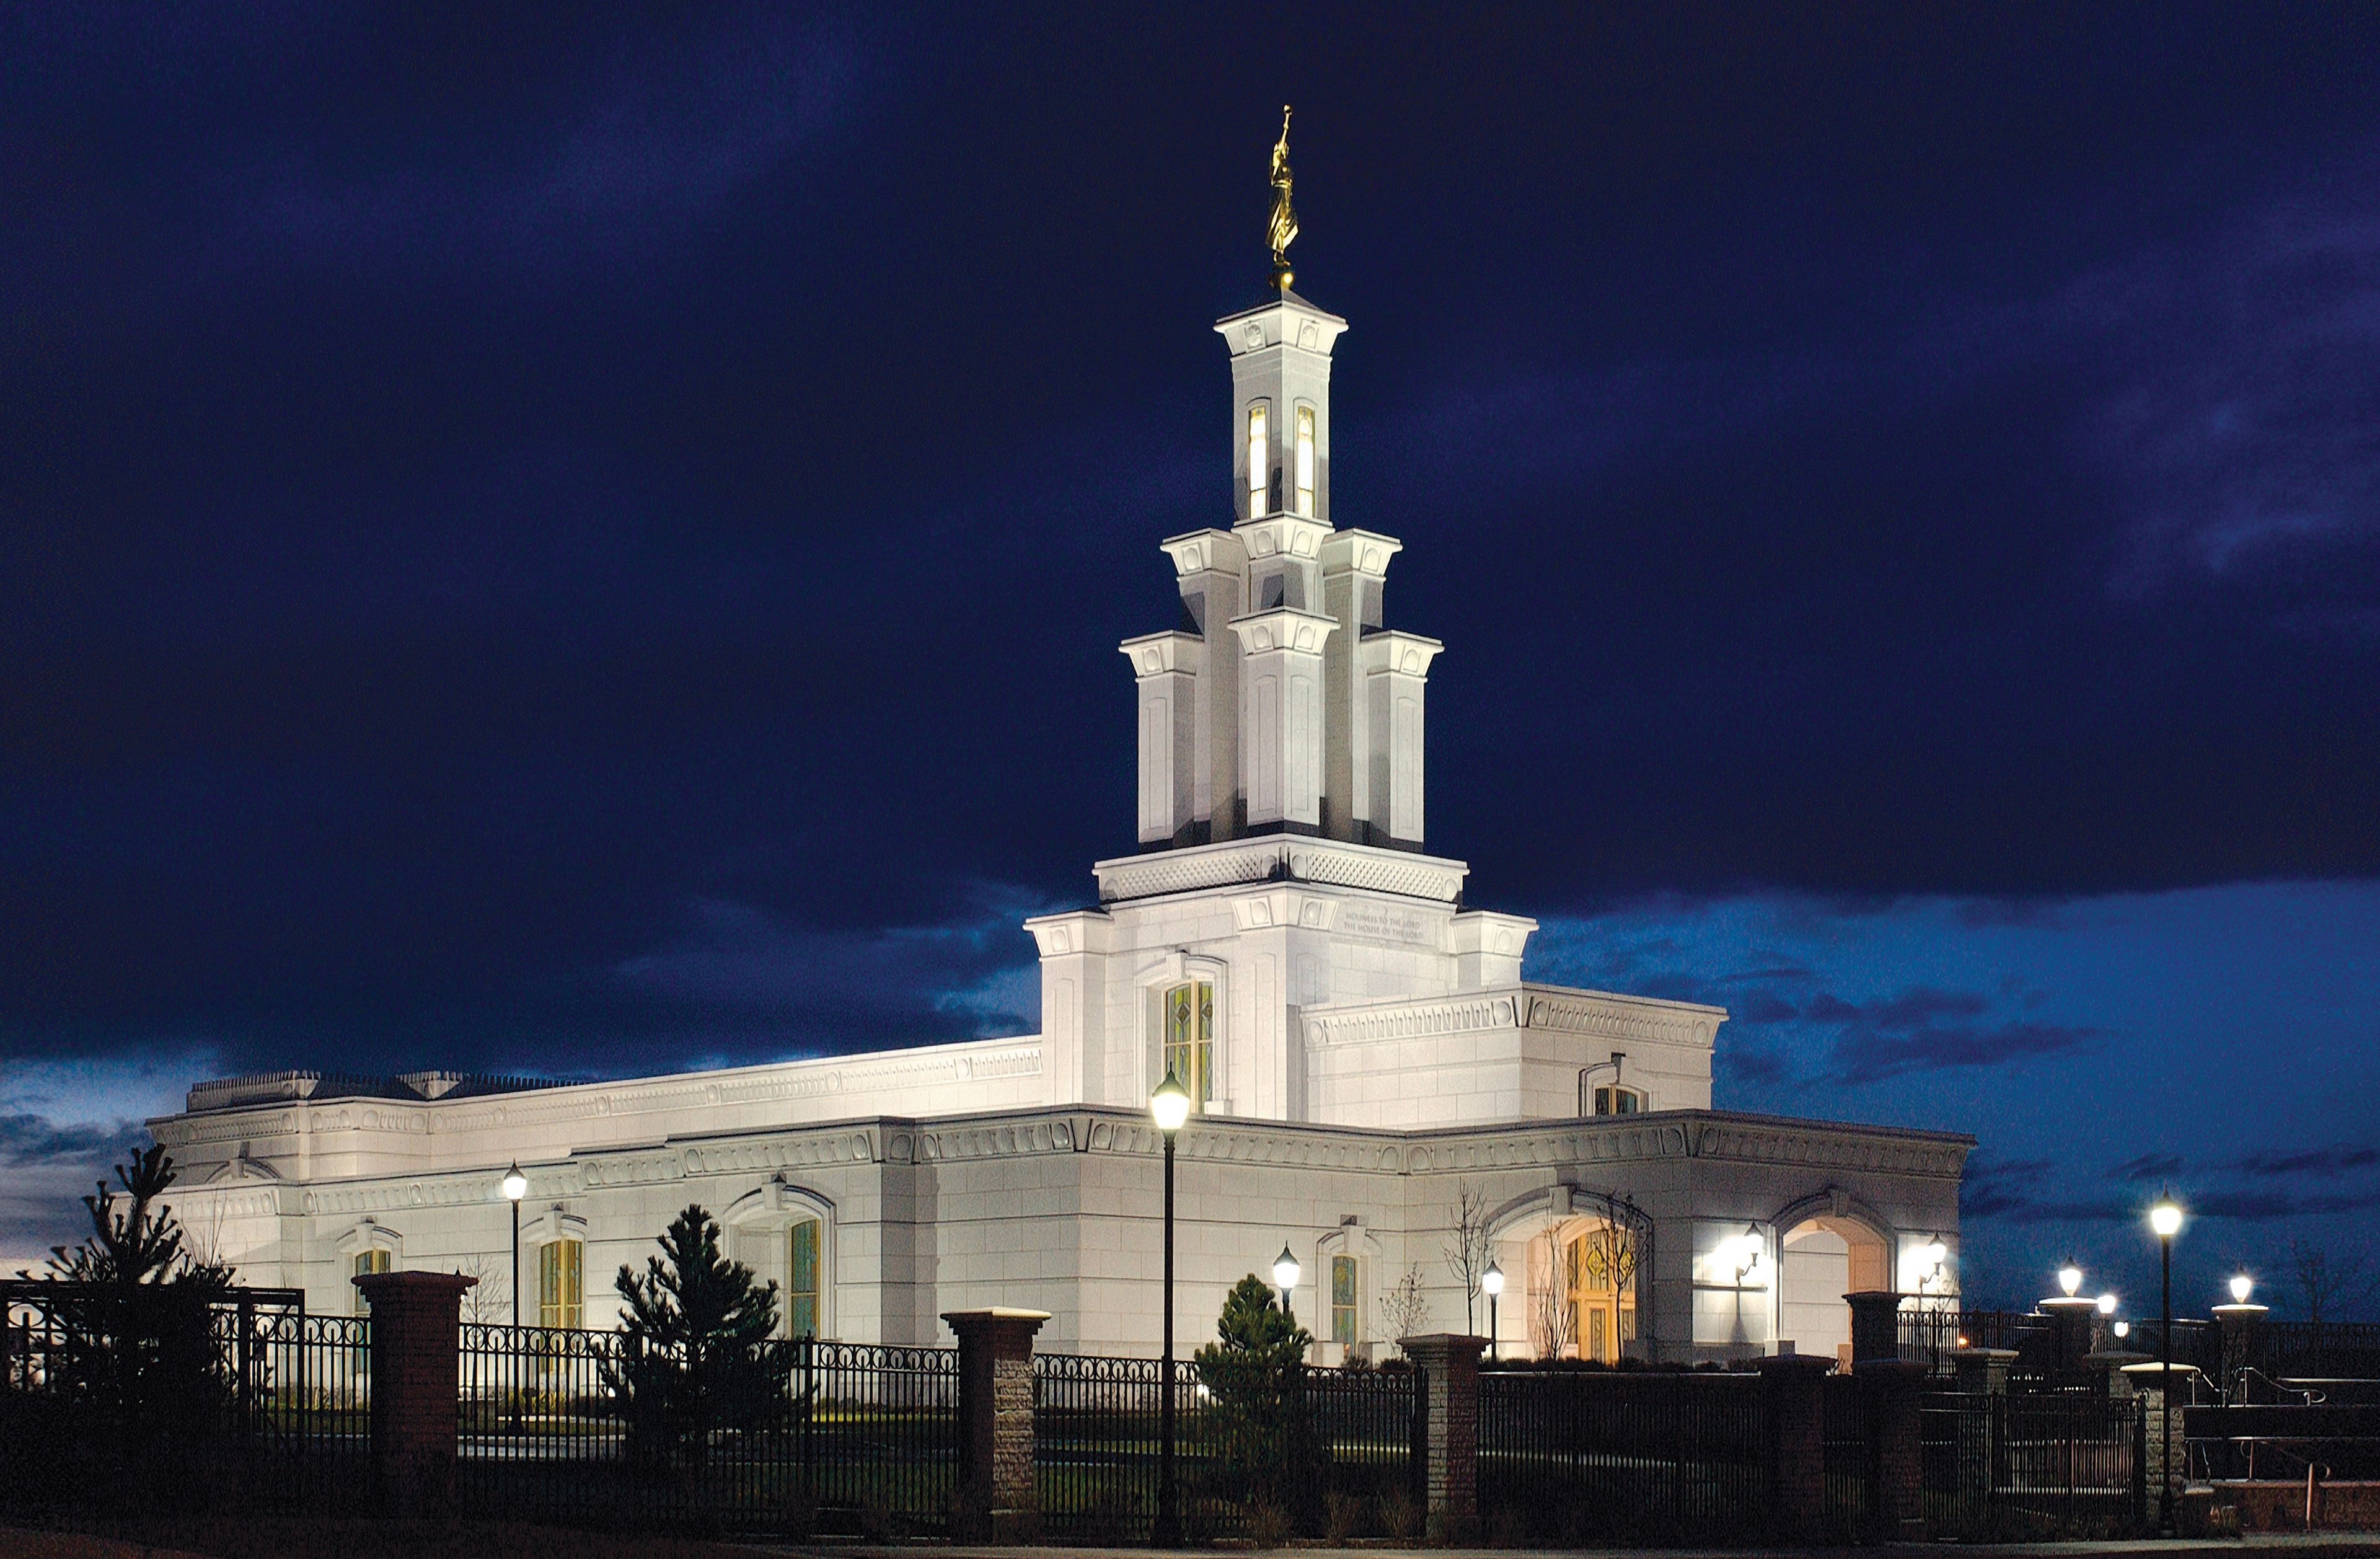 A full view of the Columbia River Washington Temple and grounds lit up at night.